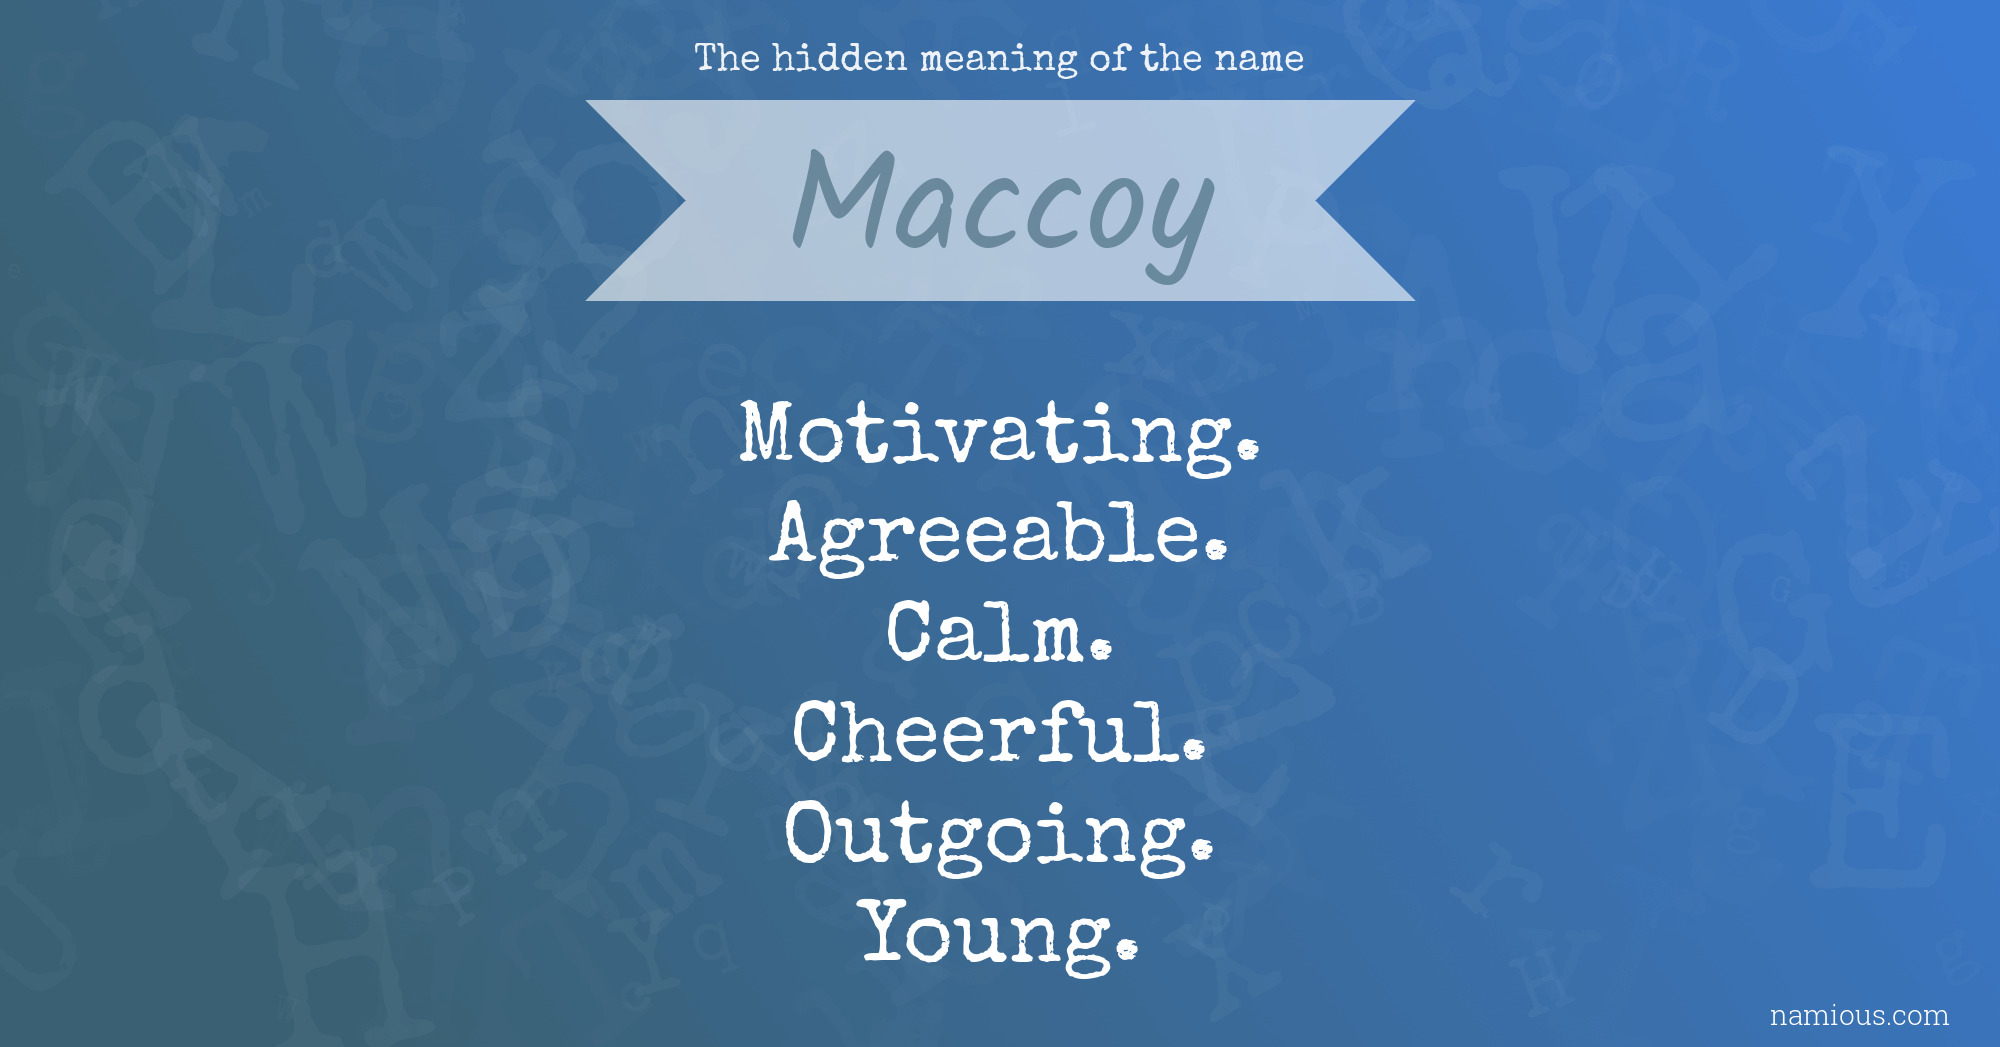 The hidden meaning of the name Maccoy